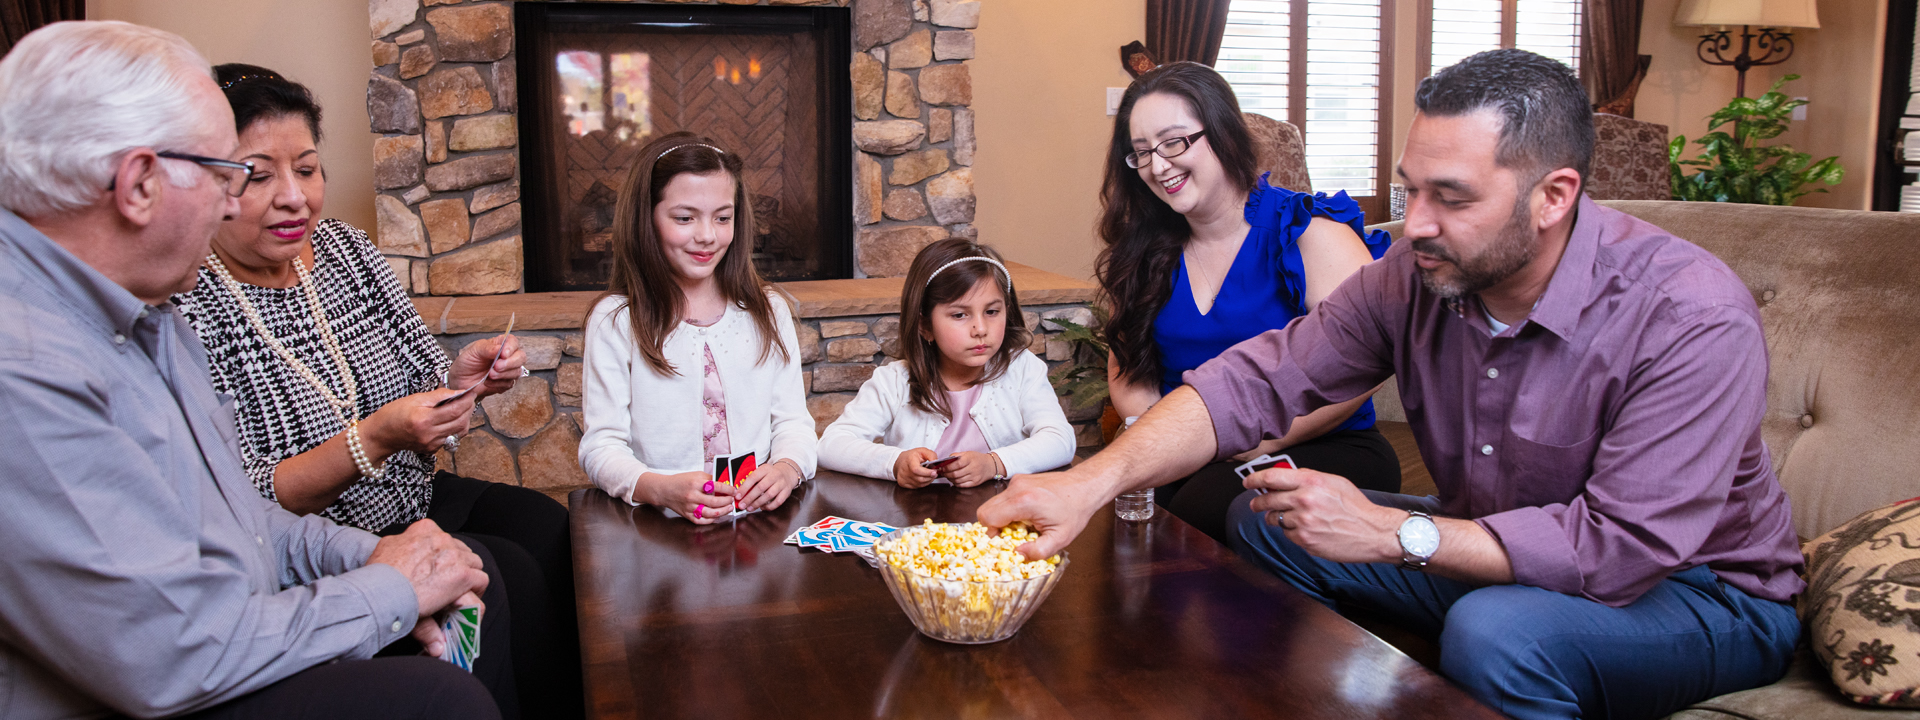 Family playing cards and eating popcorn